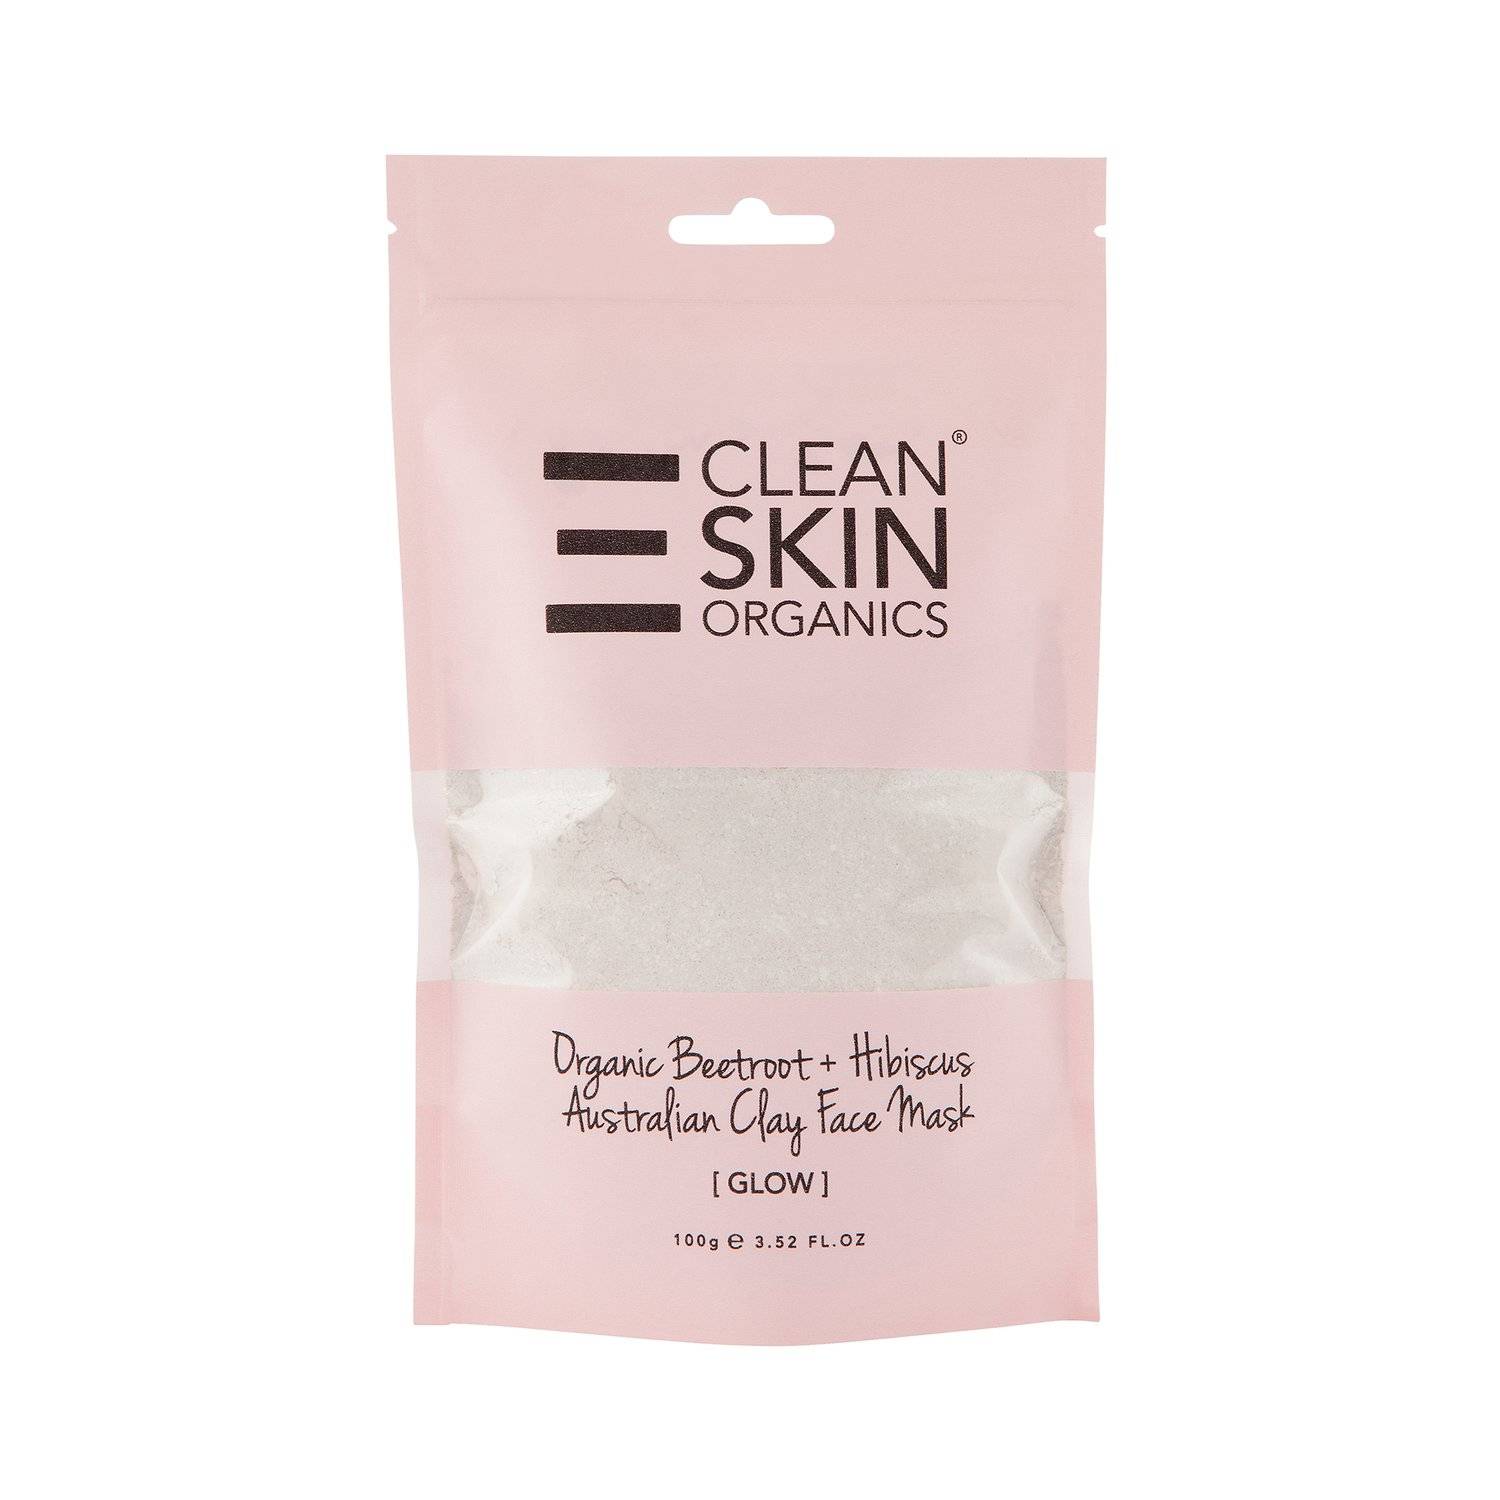 Kaolin Clay & Hibiscus Face Mask